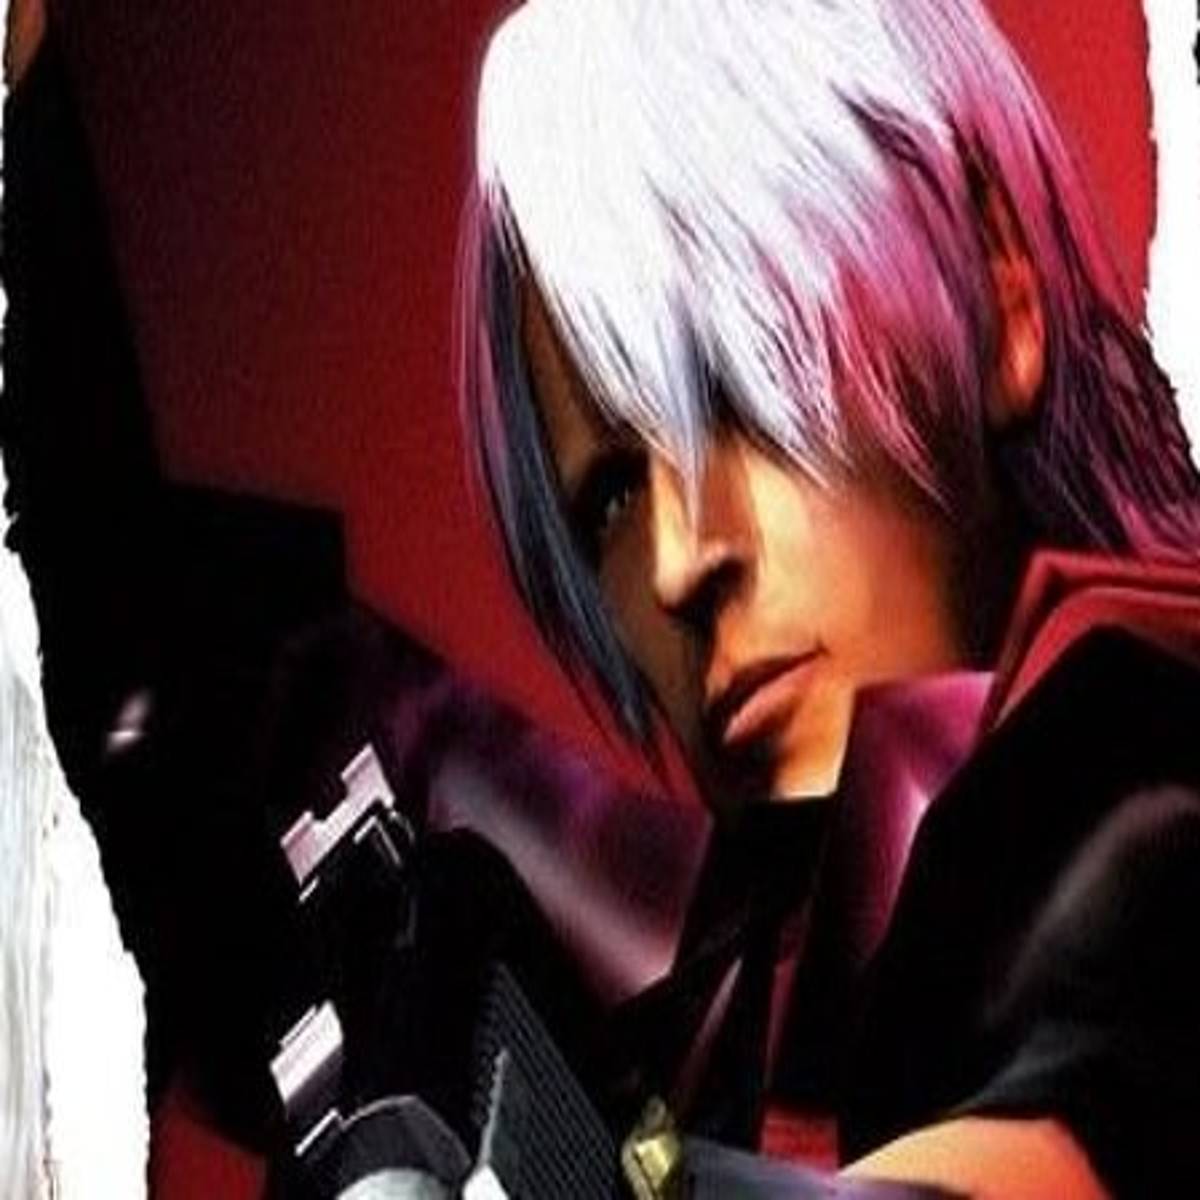 Why is DMC1's rating not just higher than DMC3's, but almost 100? Like the  game is good and all but its also flawed in a lot of areas, there's just no  way